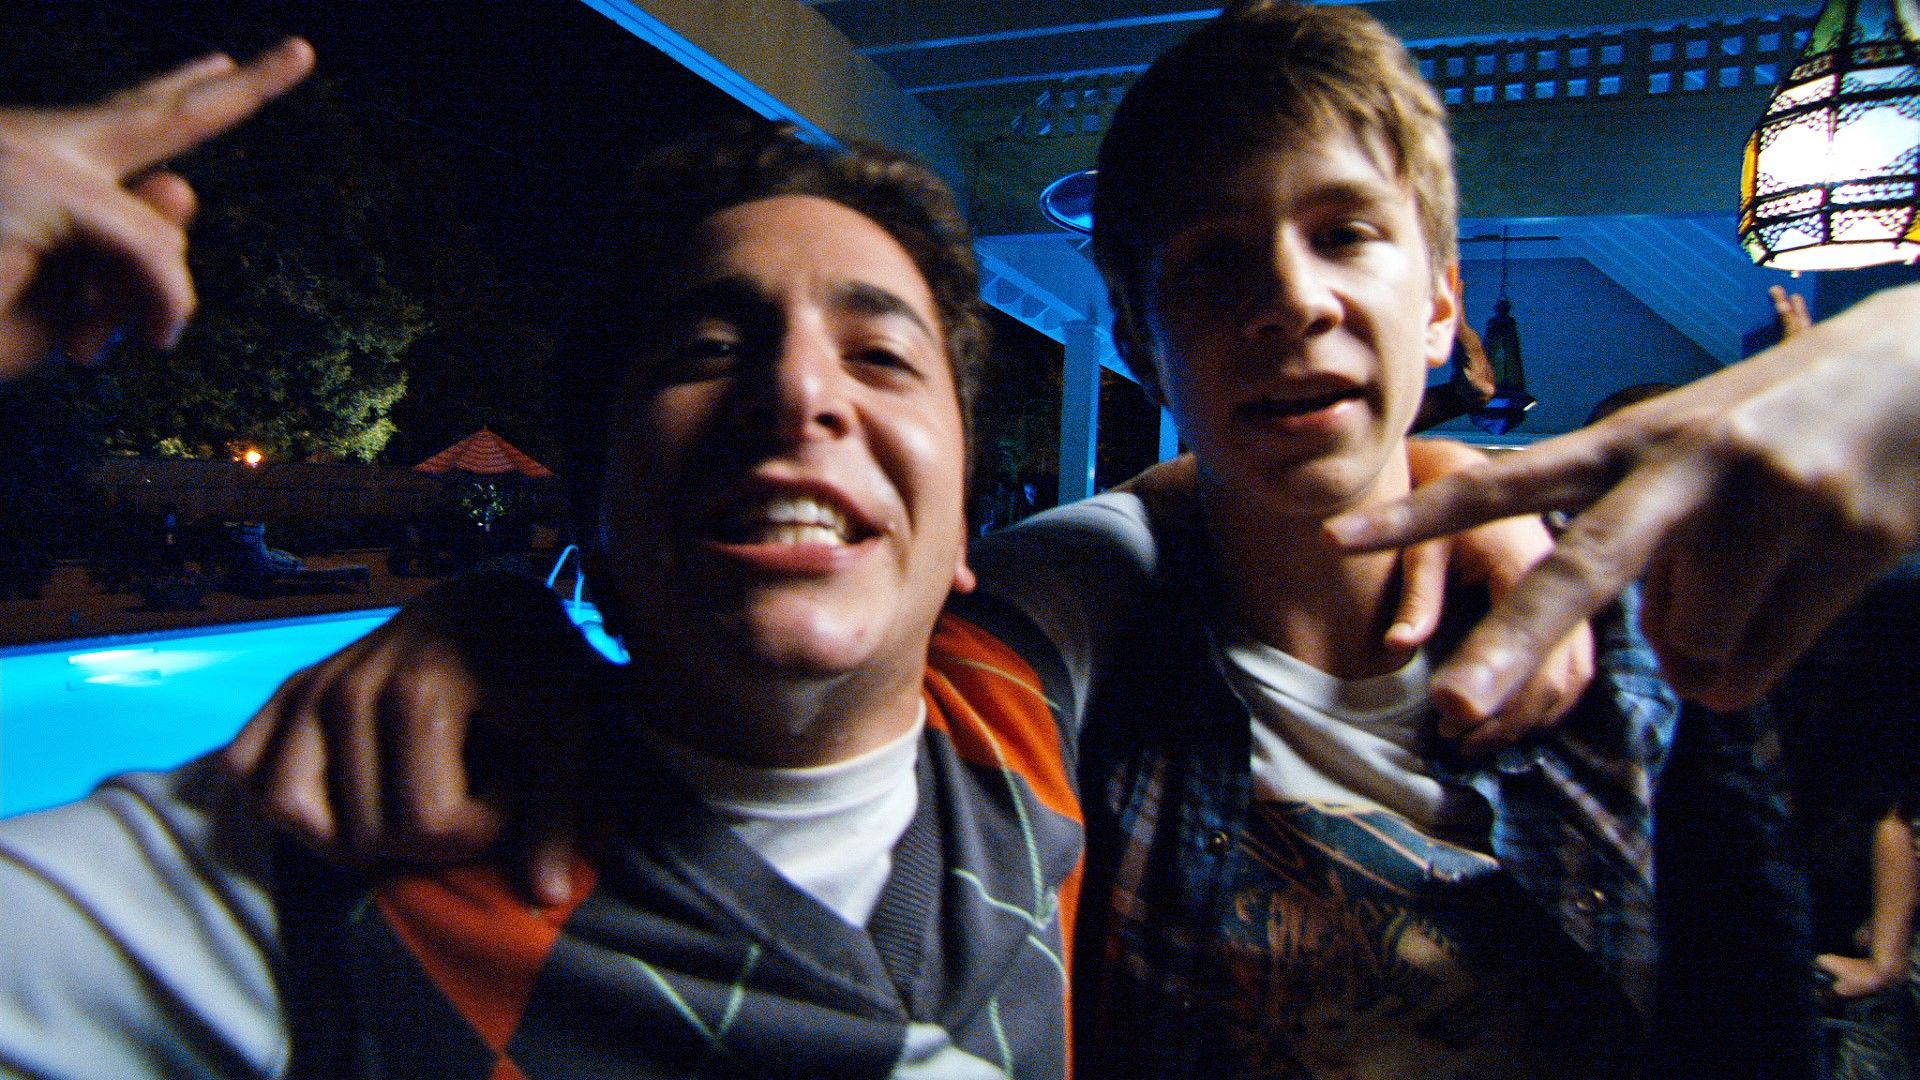 Oliver Cooper stars as Costa and Thomas Mann stars as Thomas in Warner Bros. Pictures' Project X (2012)